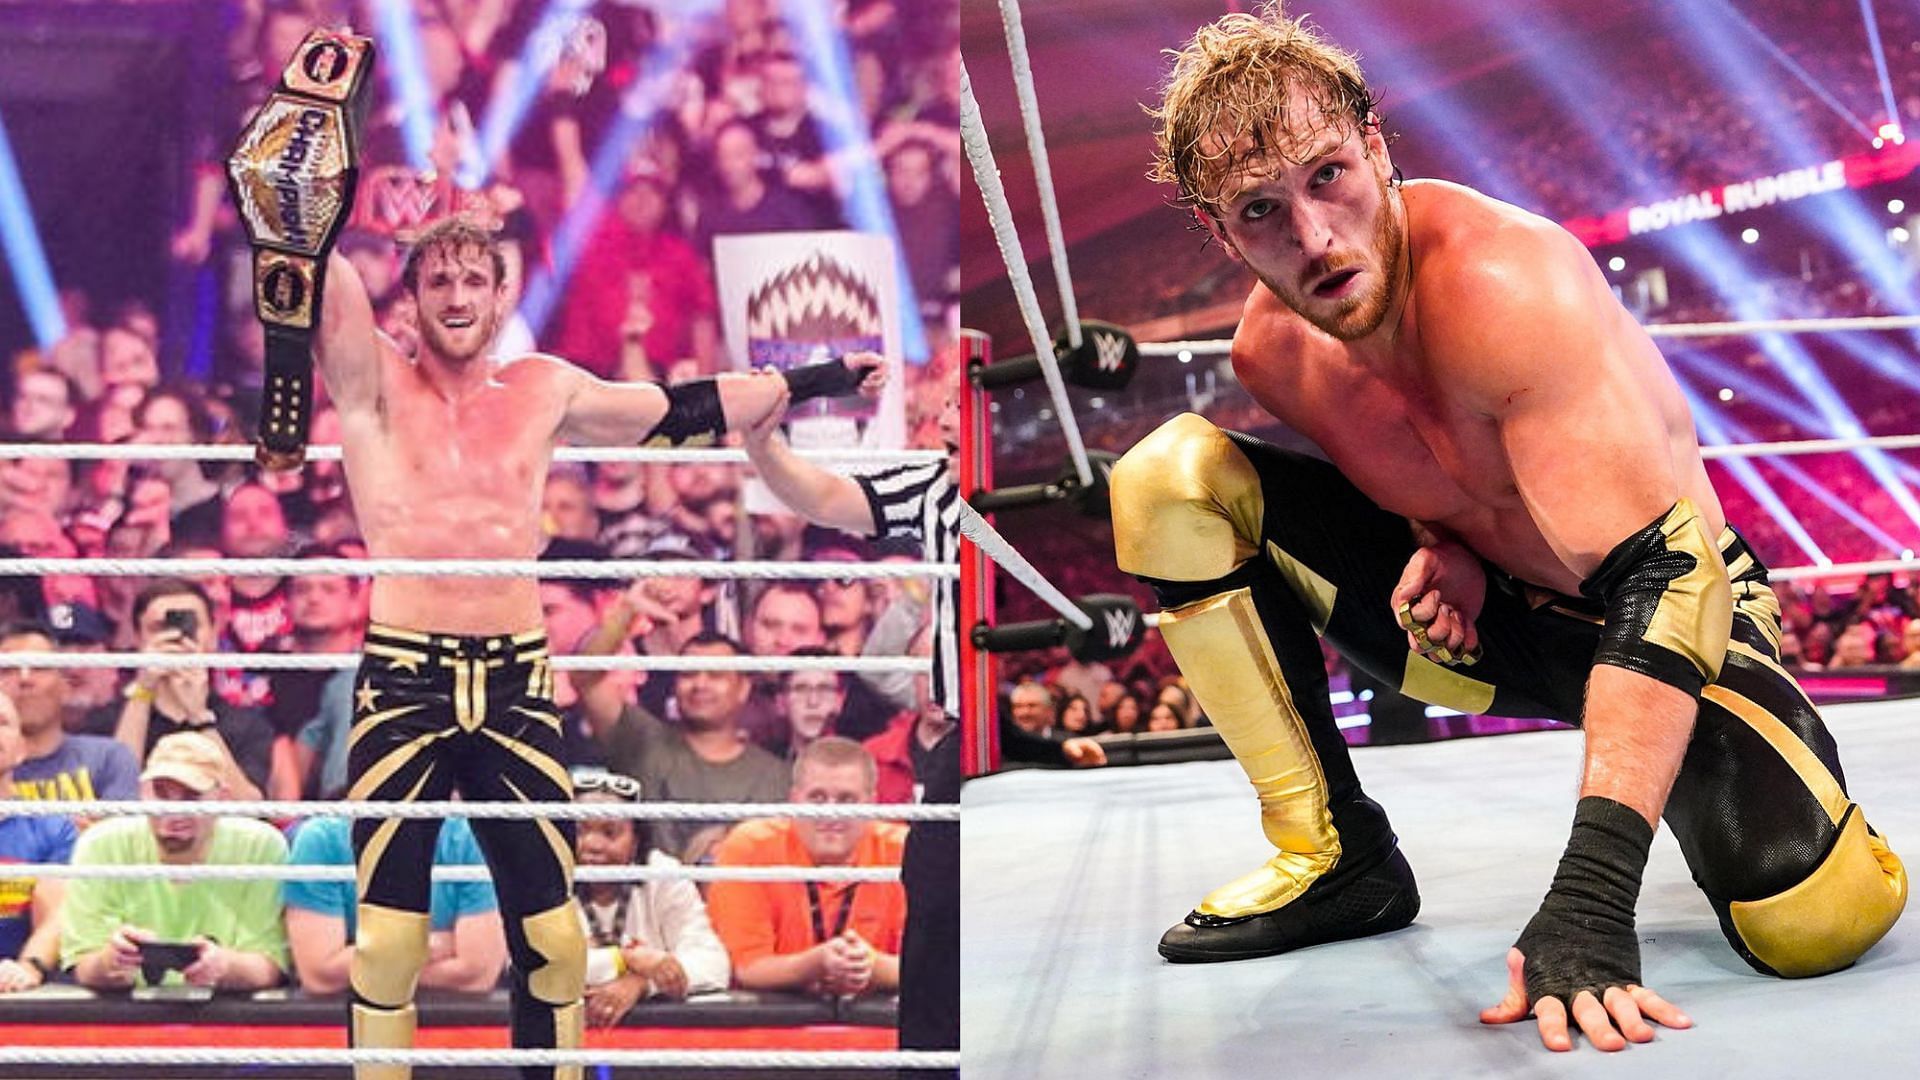 Logan Paul retained the United States Championship at the Royal Rumble